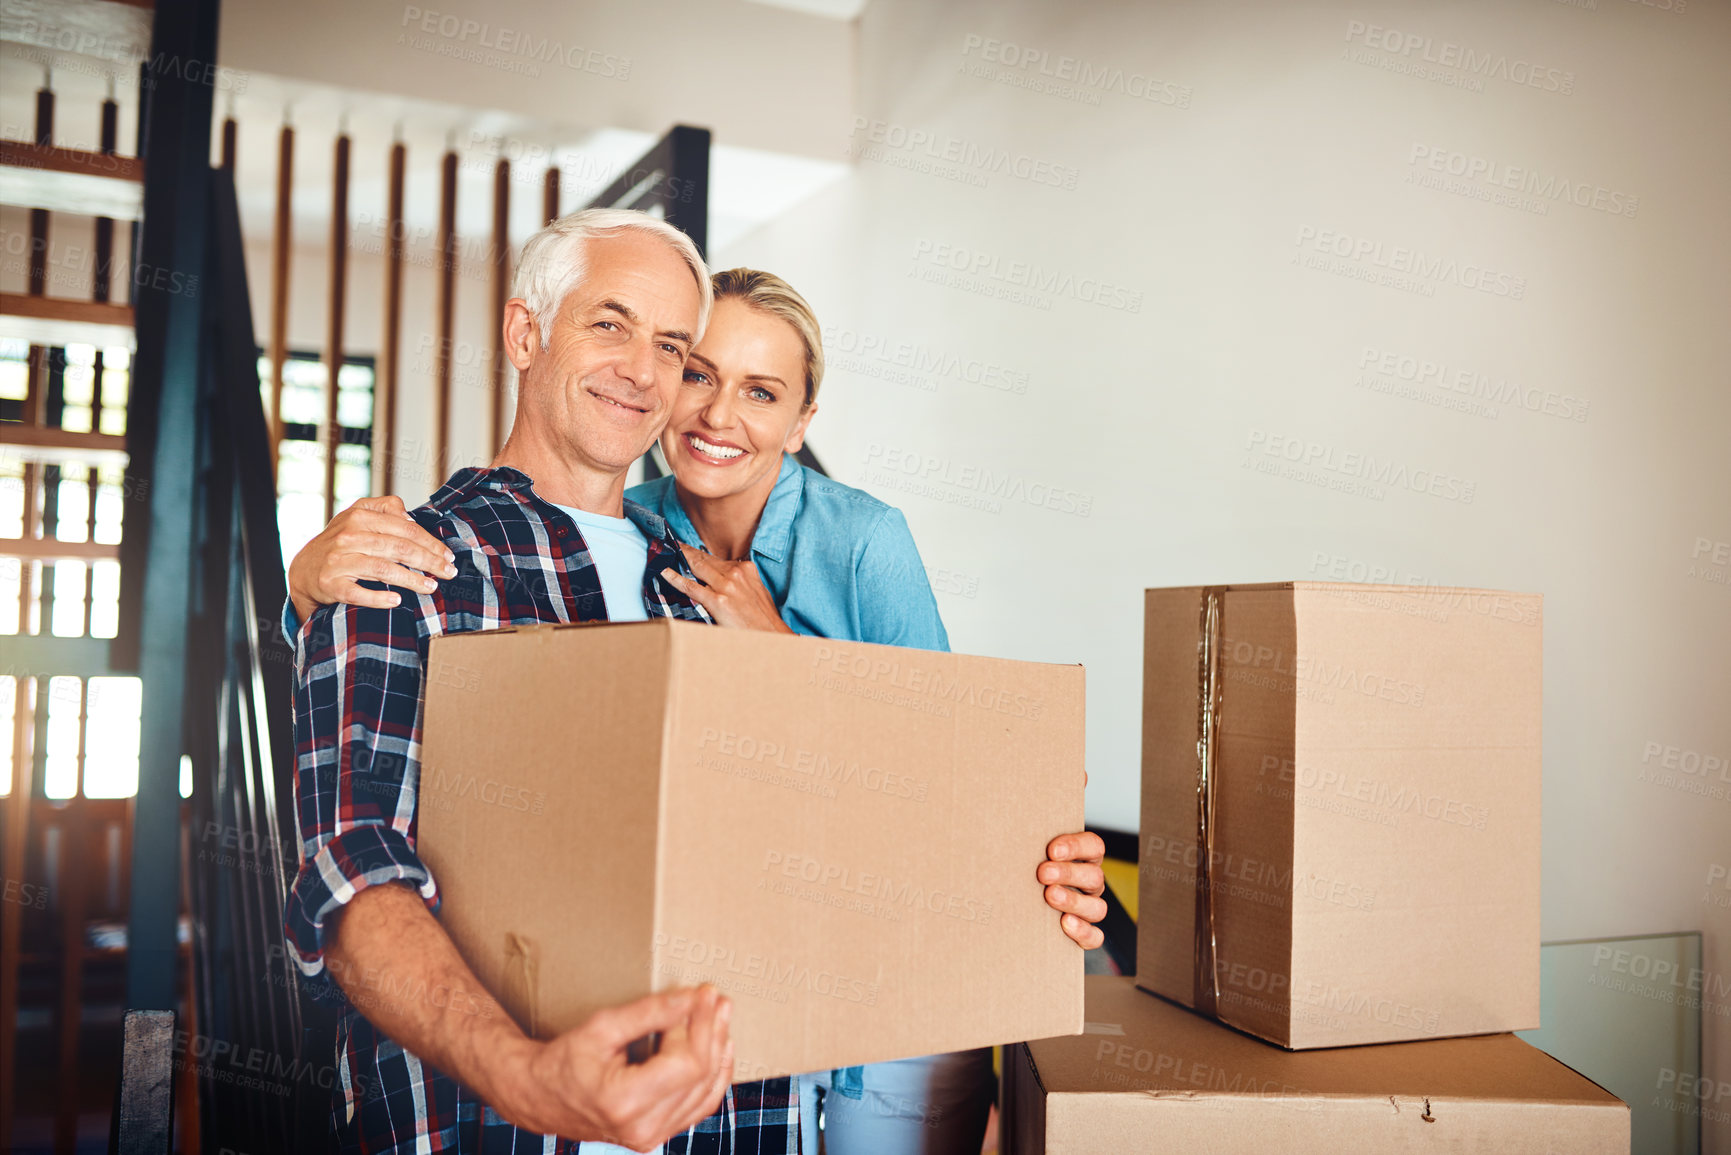 Buy stock photo Portrait of a happy mature couple carrying boxes on moving day